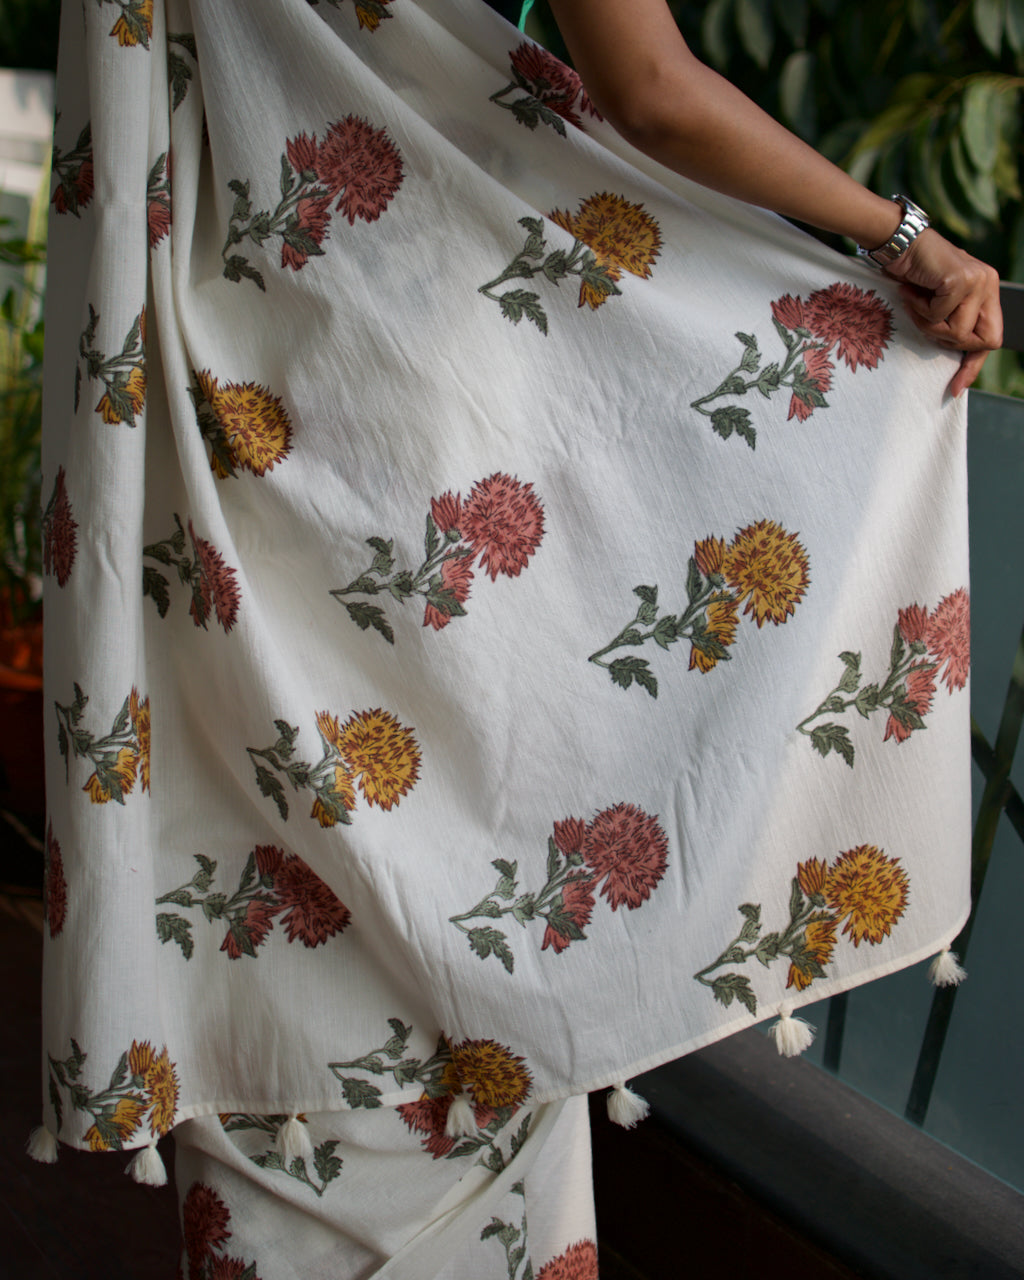 Cotton handcrafted, naturally dyed saree in white colour with handblocked floral motifs and all over kantha weave in white thread.